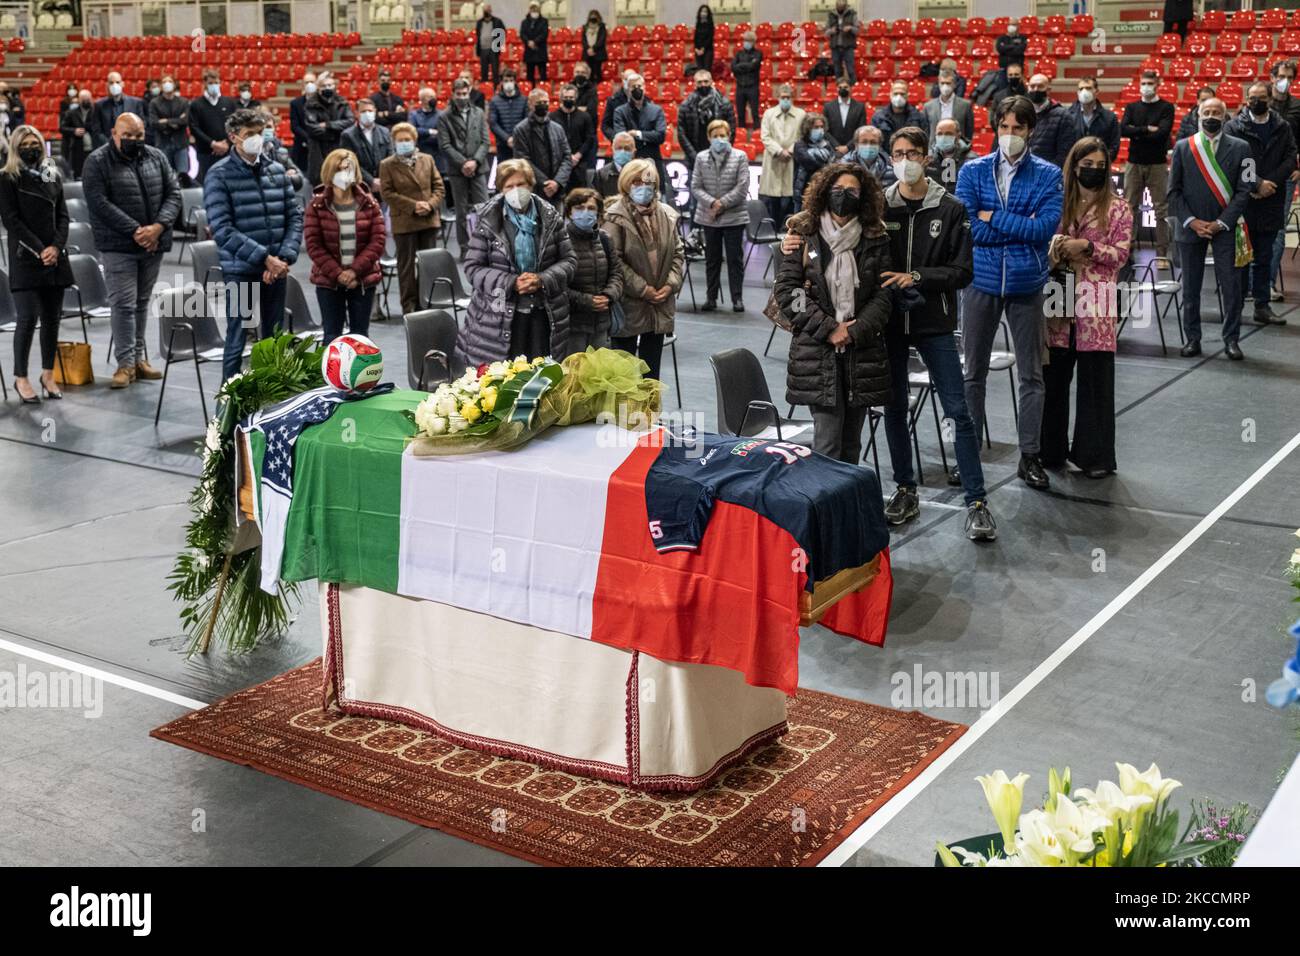 In the picture Michele Pasinato's coffin in the Kioene Arena with the family in the background with Silvia, Giorgio and Edoardo. The funeral of the volleyball player of the Italian national team, Michele Pasinato, struck down at the age of 52 by a tumor, took place today in Padua at the Kioene Arena. His teammates Martinelli, Zorzi, Lucchetta and Velasco are present. The city of Padua, where he coached the youth volleyball team, has tightened around his memory. On April 12, 2021, in Padova, Italy. (Photo by Roberto Silvino/NurPhoto) Stock Photo